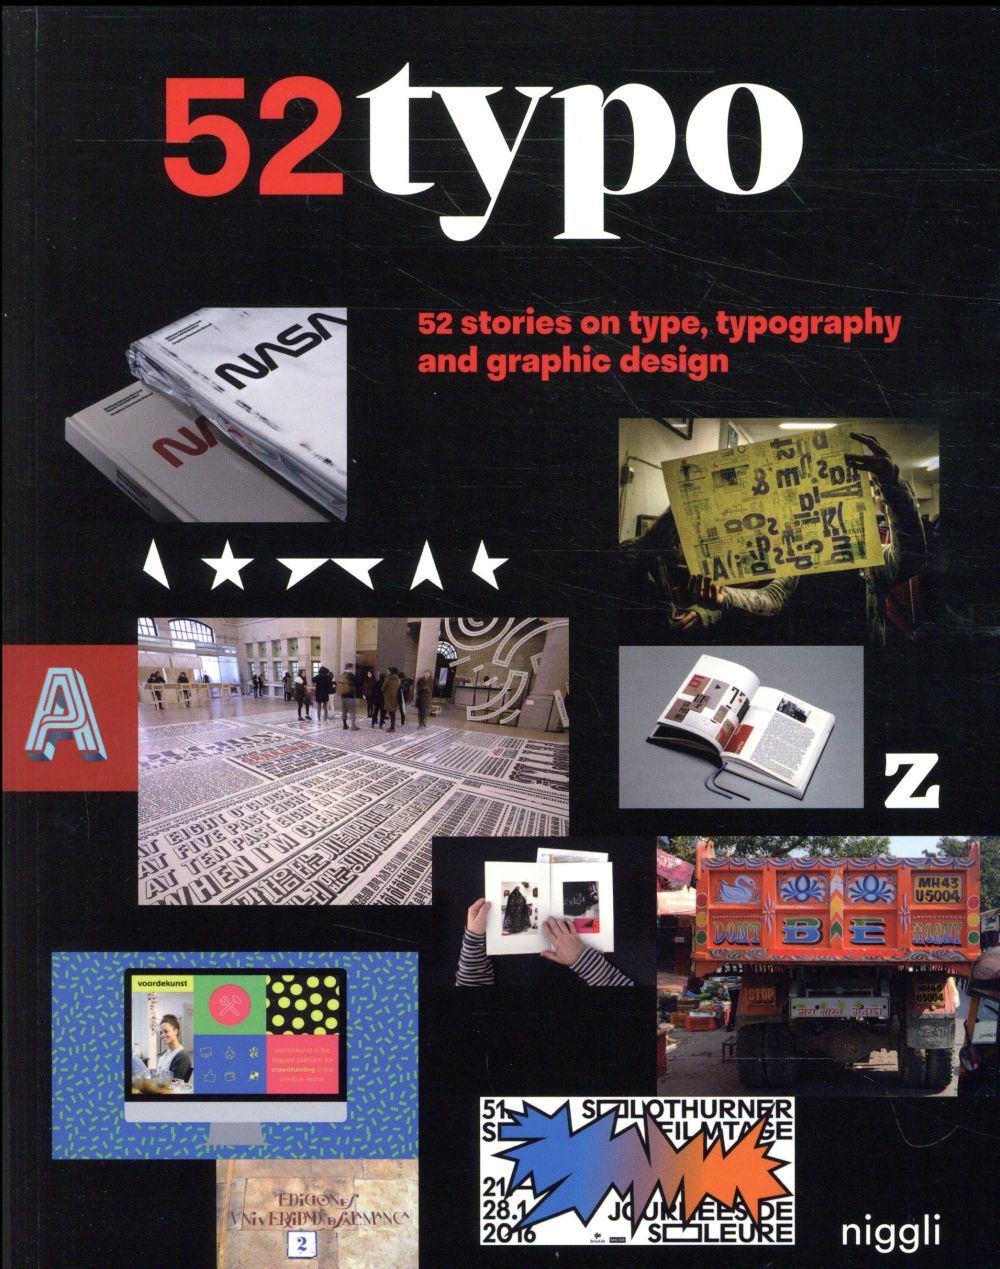 52 TYPO - 52 STORIES ON TYPE, TYPOGRAPHY AND GRAPHIC DESIGN